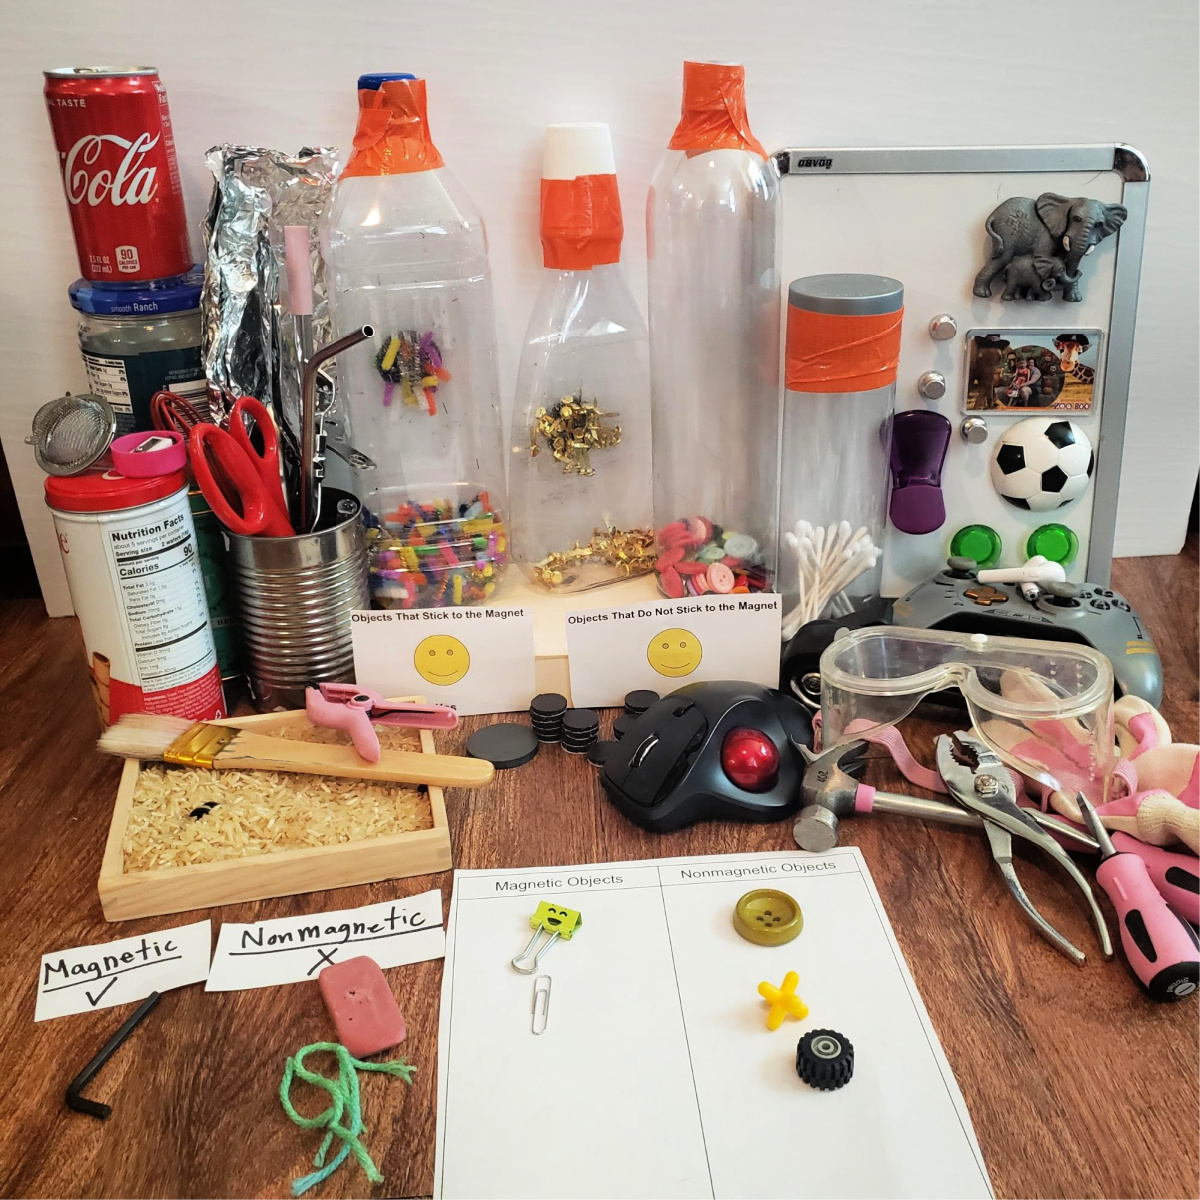 materials for exploring magnetism activity learning at home with kids